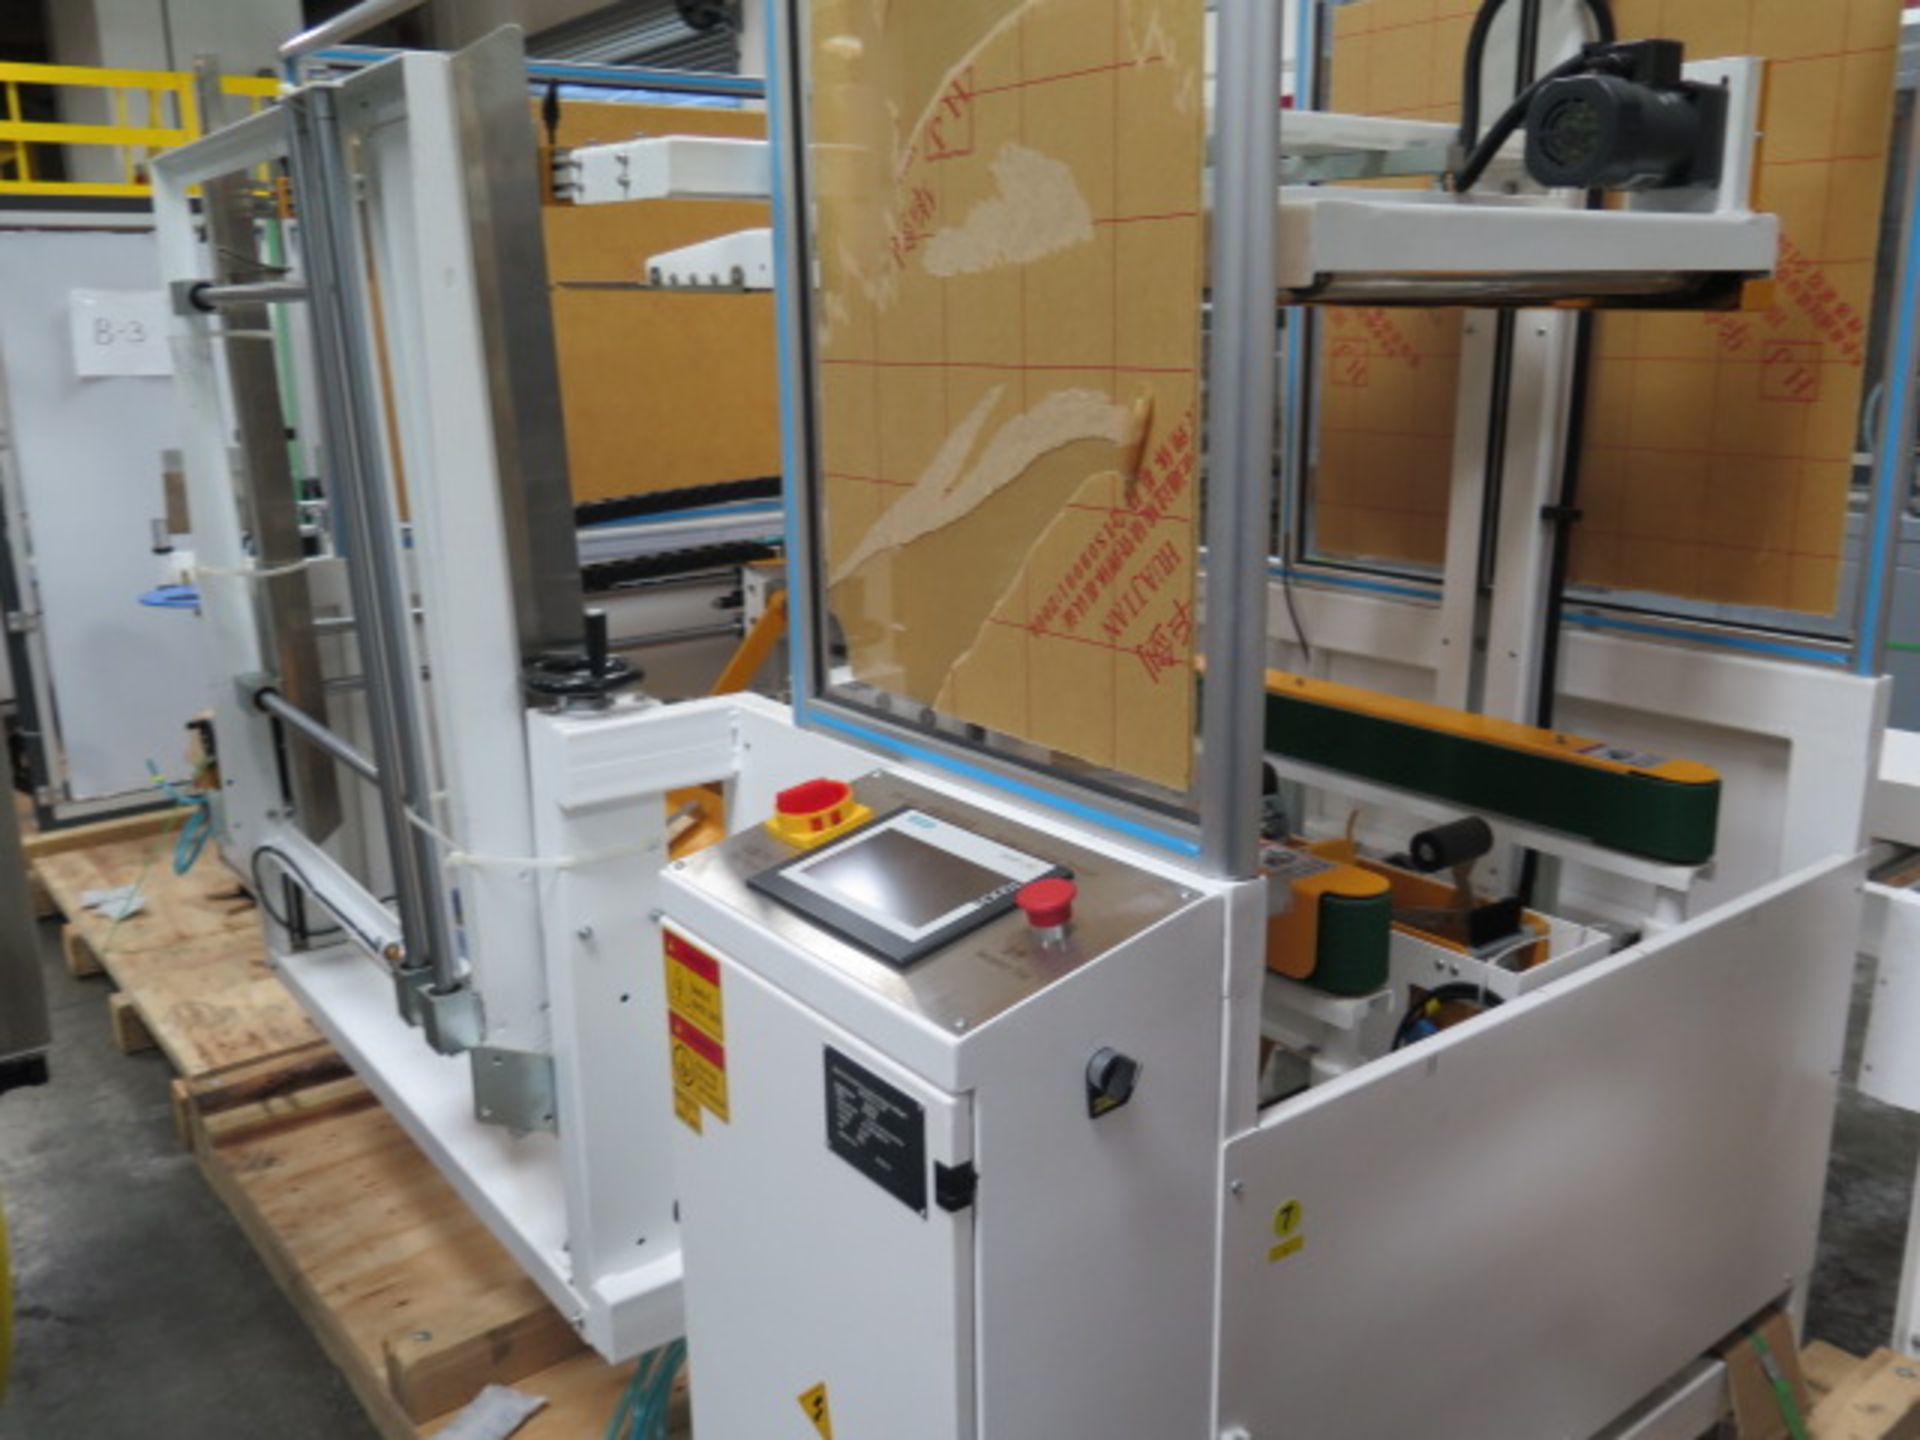 2022(NEW) Rongyu RY-ZH-80 Packaging Machine s/n220302 w/Siemens Smart Line Touch Controls,SOLD AS IS - Image 33 of 48